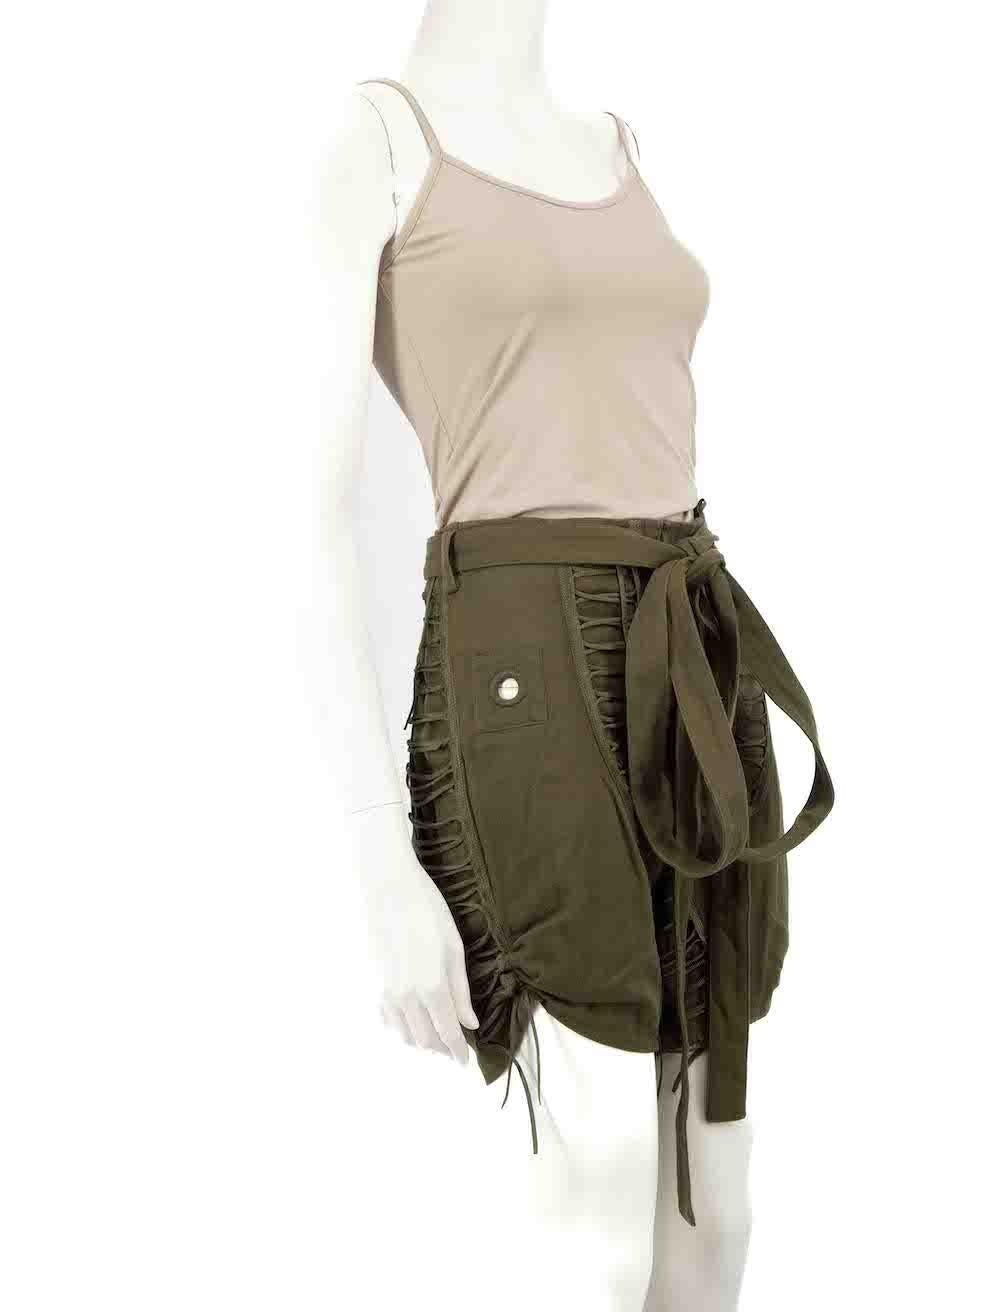 CONDITION is Very good. Hardly any wear to shorts is evident on this used Saint Laurent designer resale item.
 
 
 
 Details
 
 
 Gabardine model
 
 Khaki
 
 Cotton
 
 Shorts
 
 Lace up detail
 
 Tie strap belted
 
 Back zip closure with button
 
 
